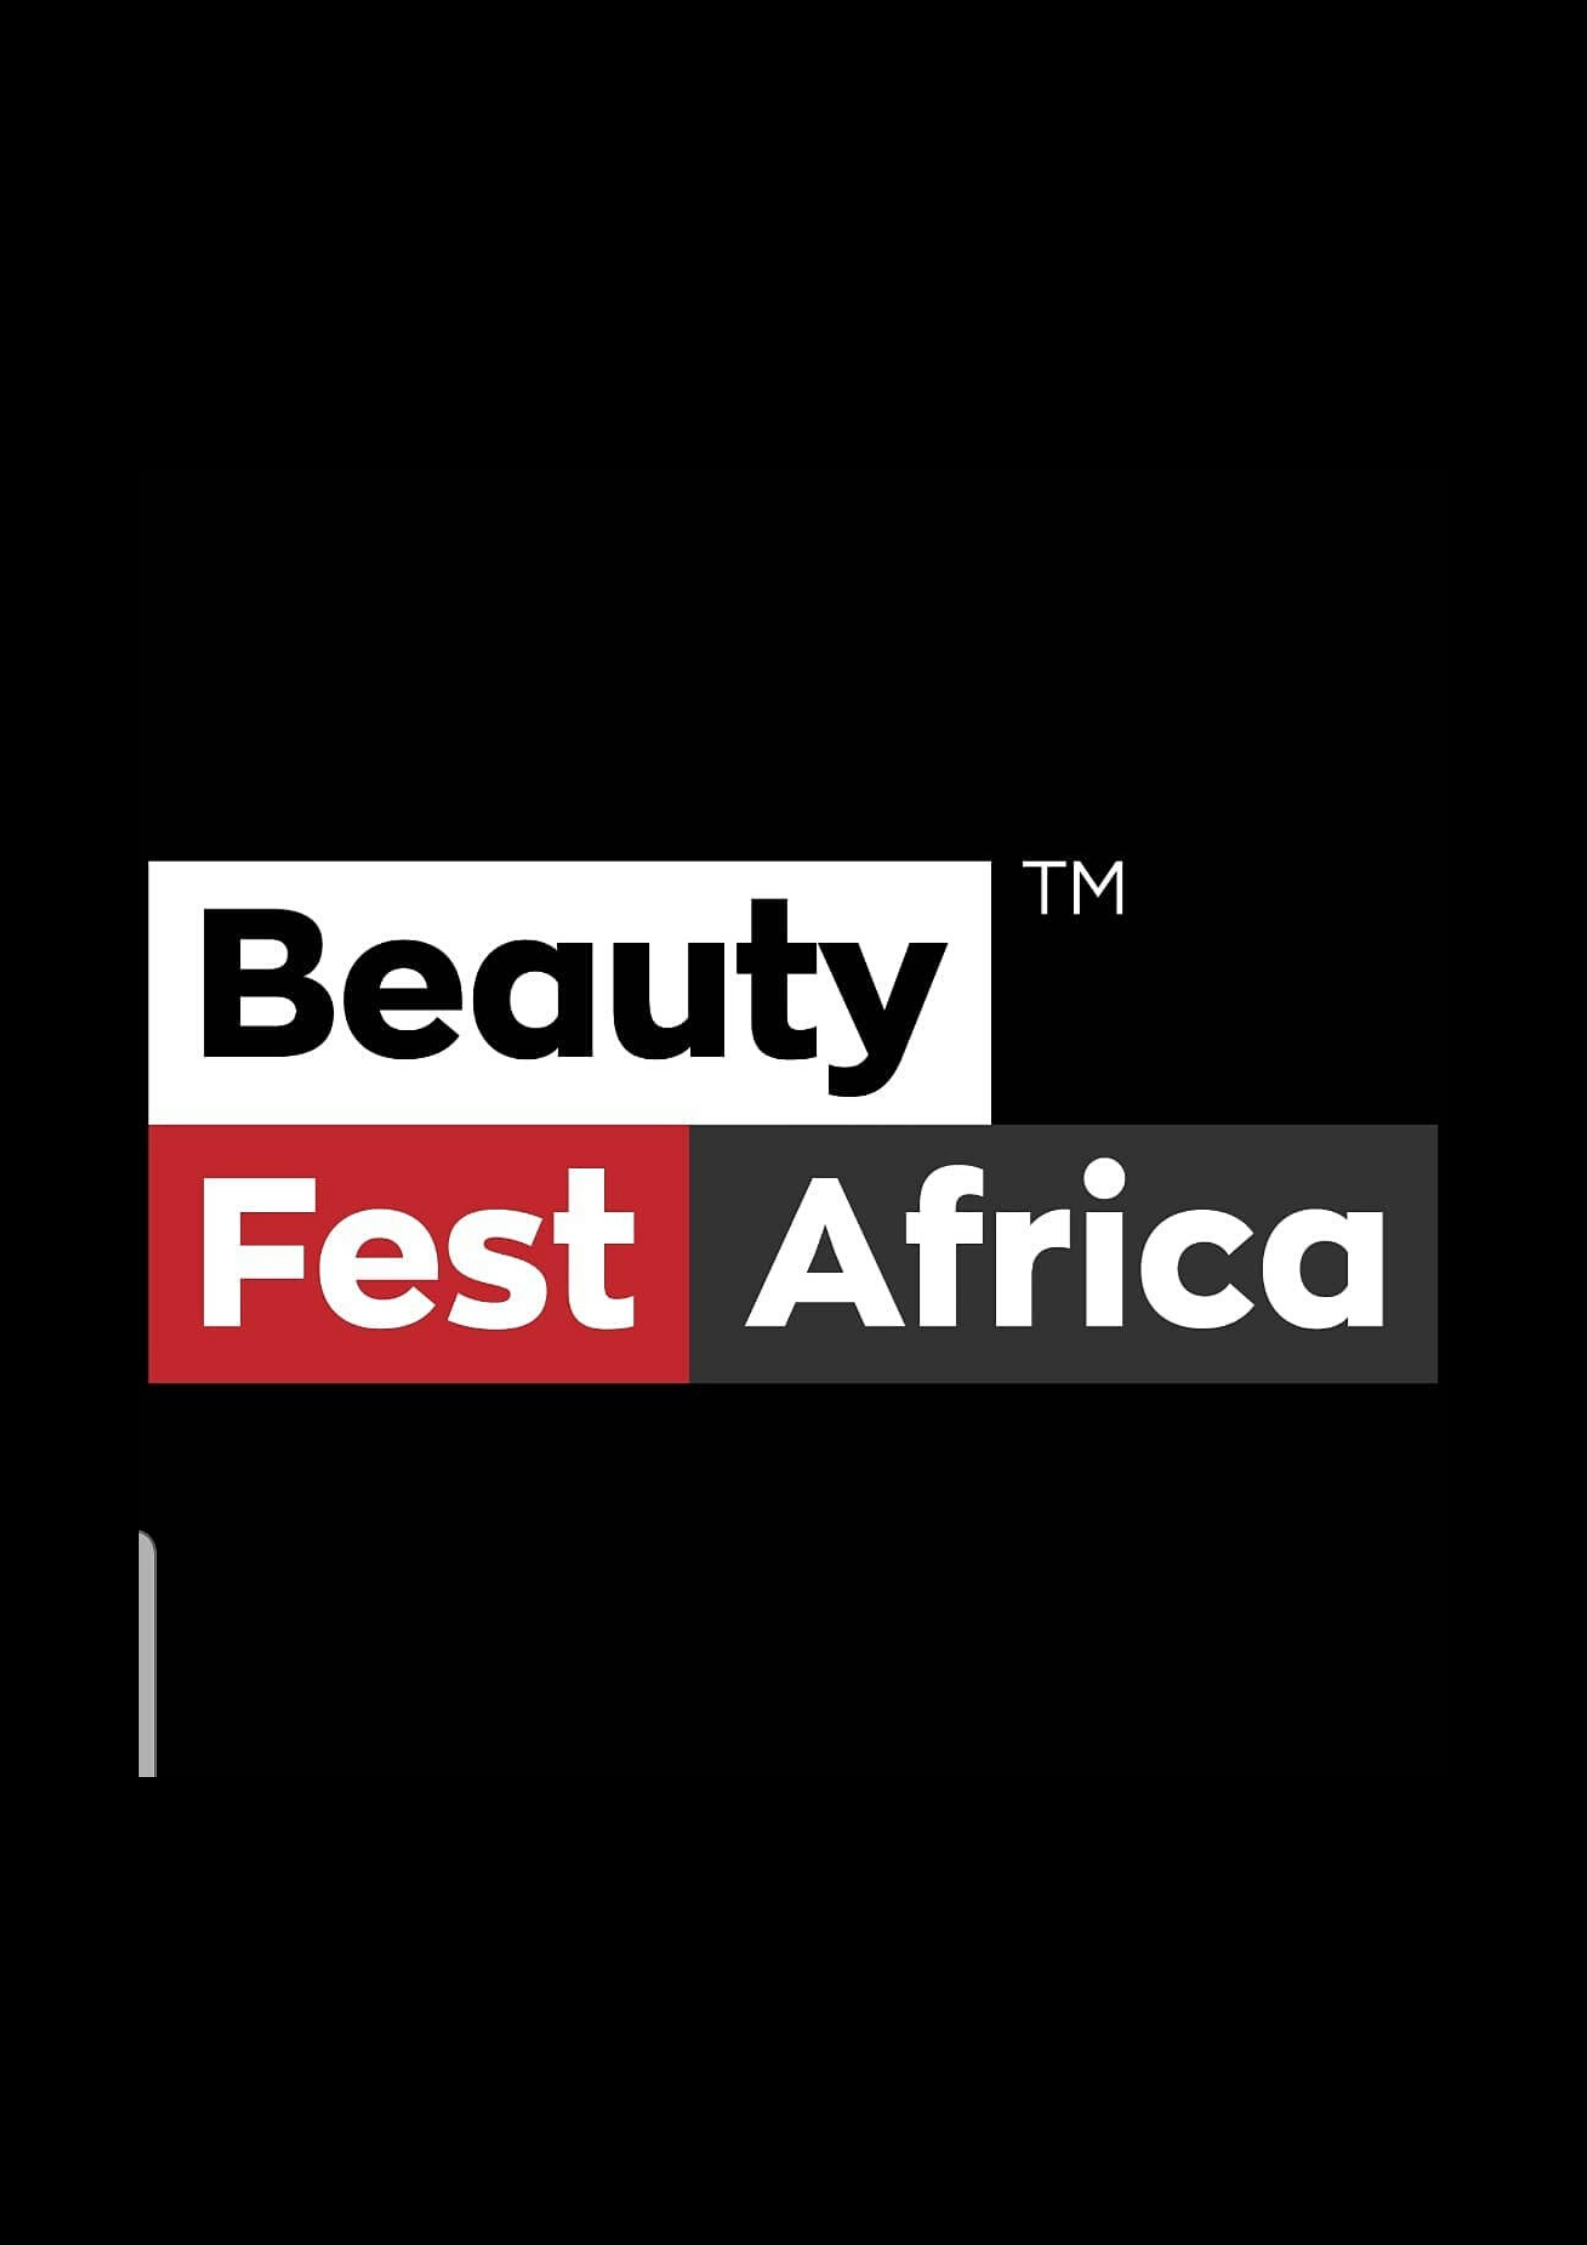 BEAUTY FEST AFRICA 2020: ESTABLISHING SUSTAINABILITY IN THE BUSINESS OF BEAUTY